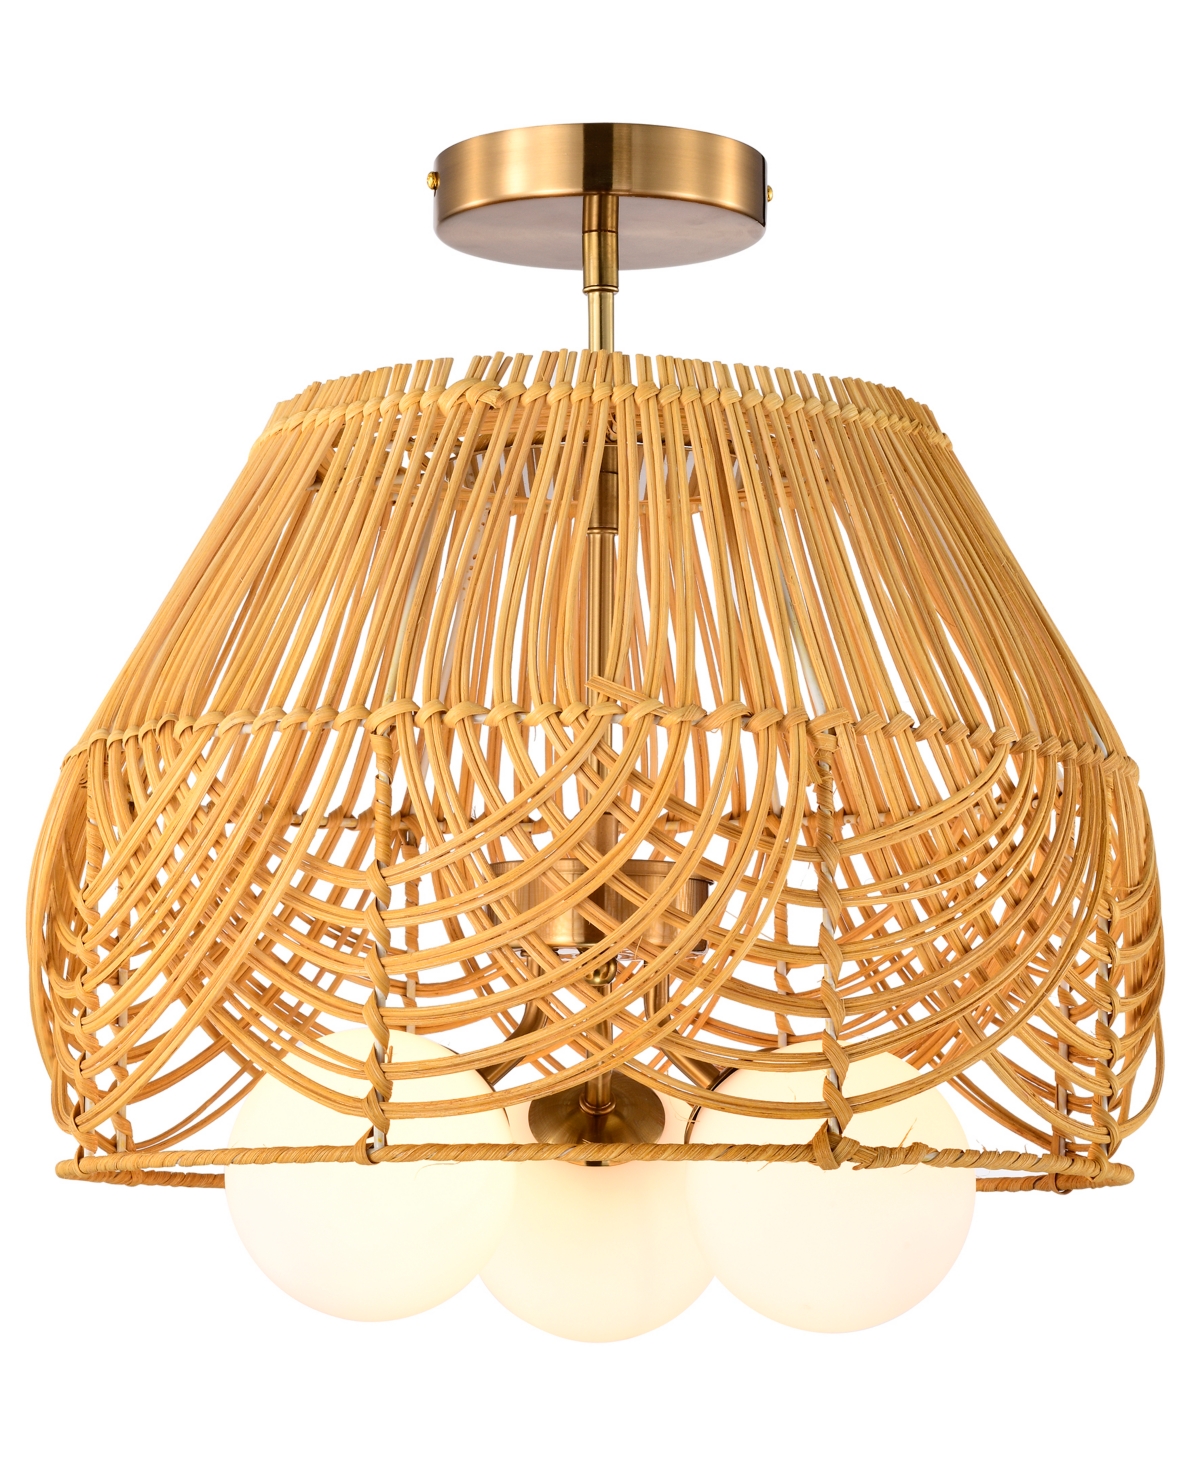 Home Accessories Lucilla 15" Indoor Finish Semi-flush Mount Ceiling Light With Light Kit In Brass And Woven Rattan